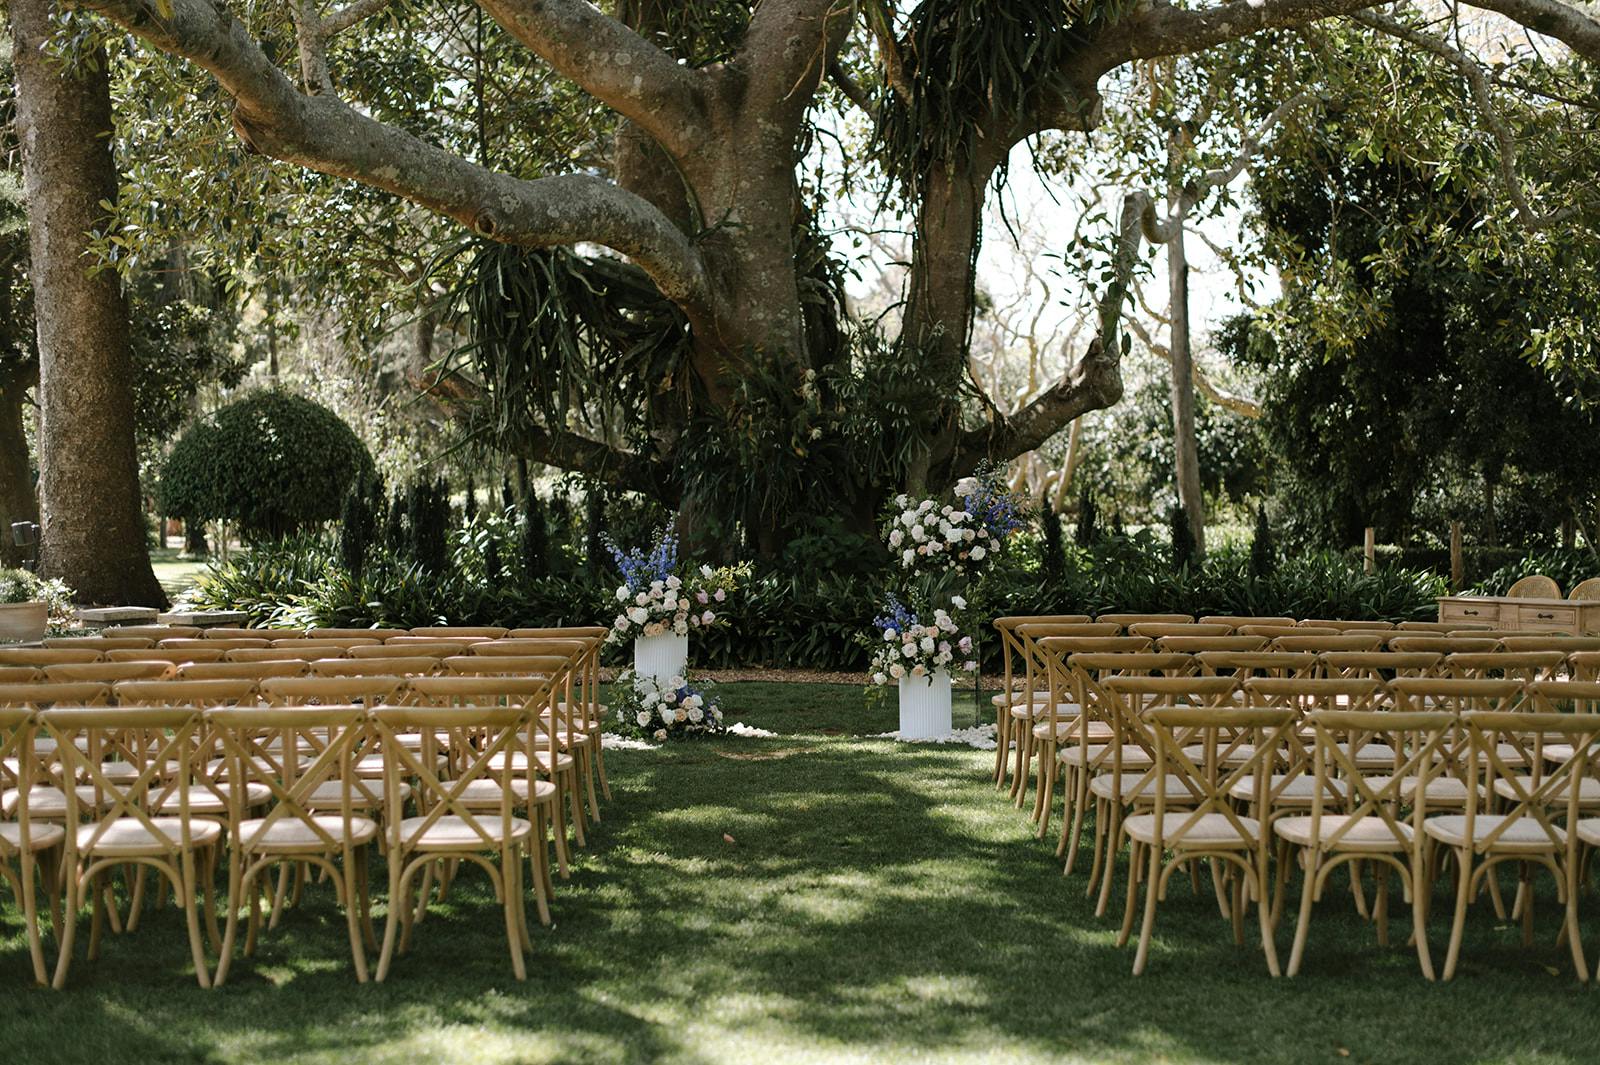 An outdoor wedding setup featuring wooden chairs arranged in rows on green grass, leading to a large tree. The tree is adorned with floral arrangements in shades of white, pink, and purple, creating a natural archway. The scene is surrounded by lush greenery.